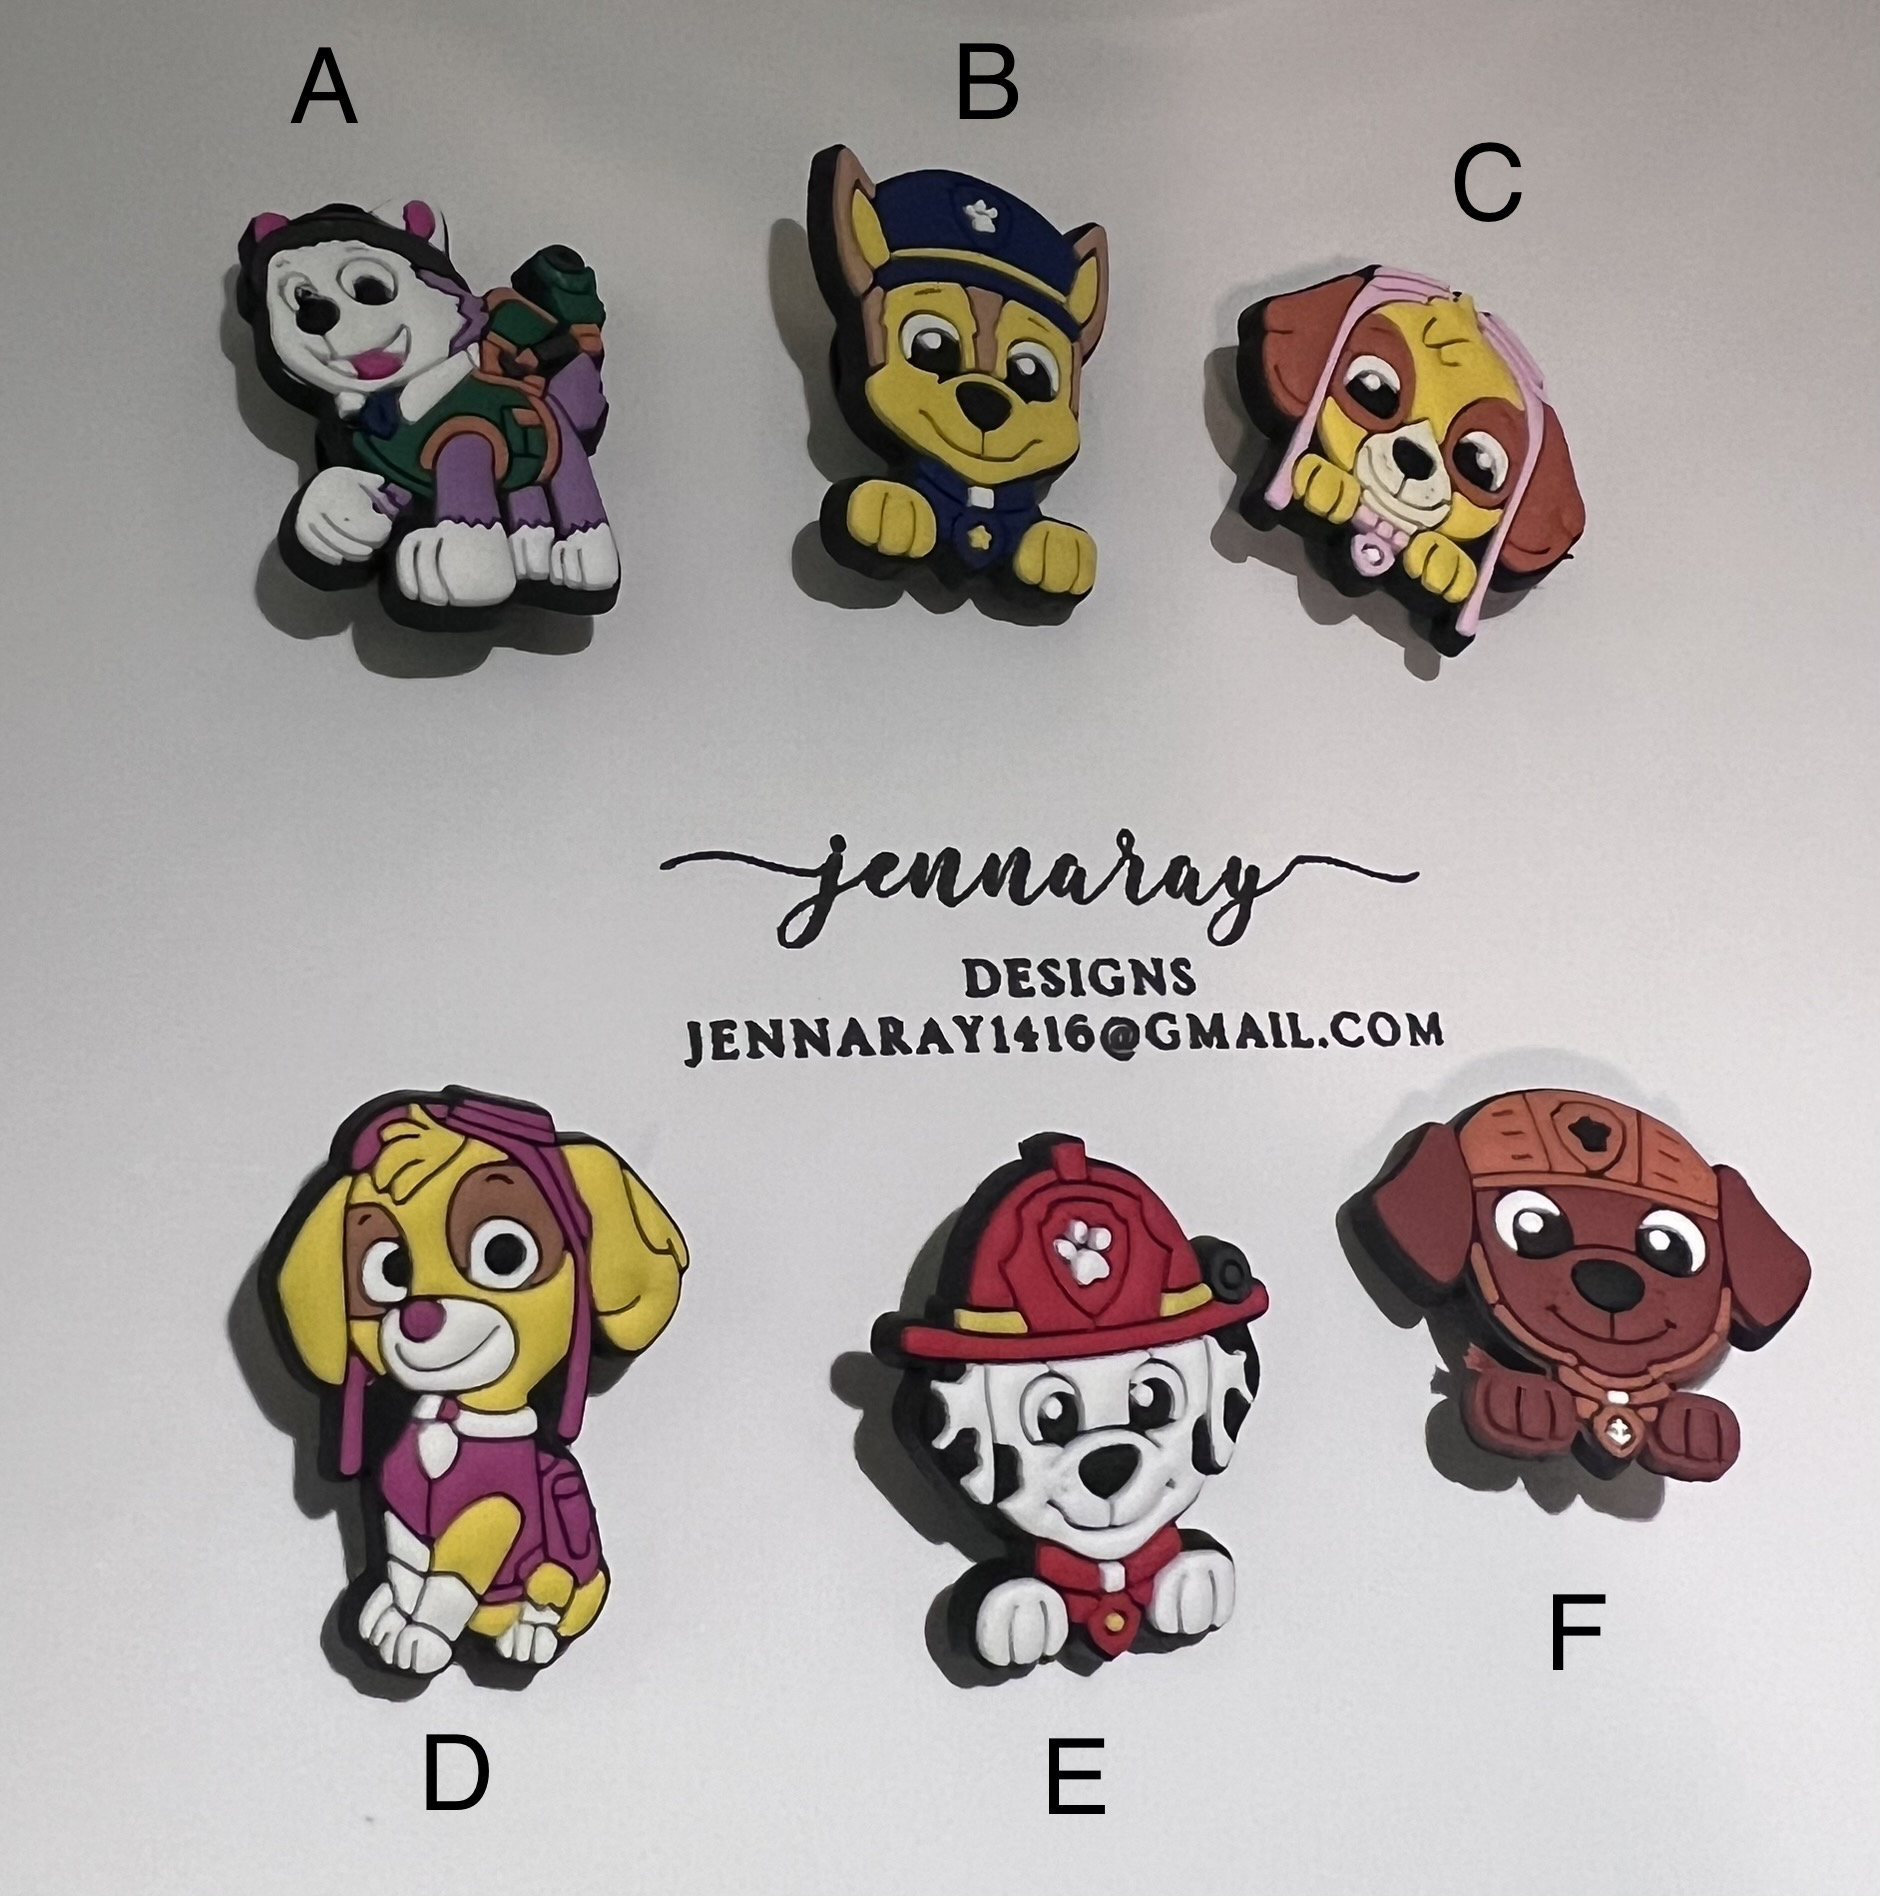 10 Pieces of Dog Puppy Animal Resin Charms for Jewelry Making 